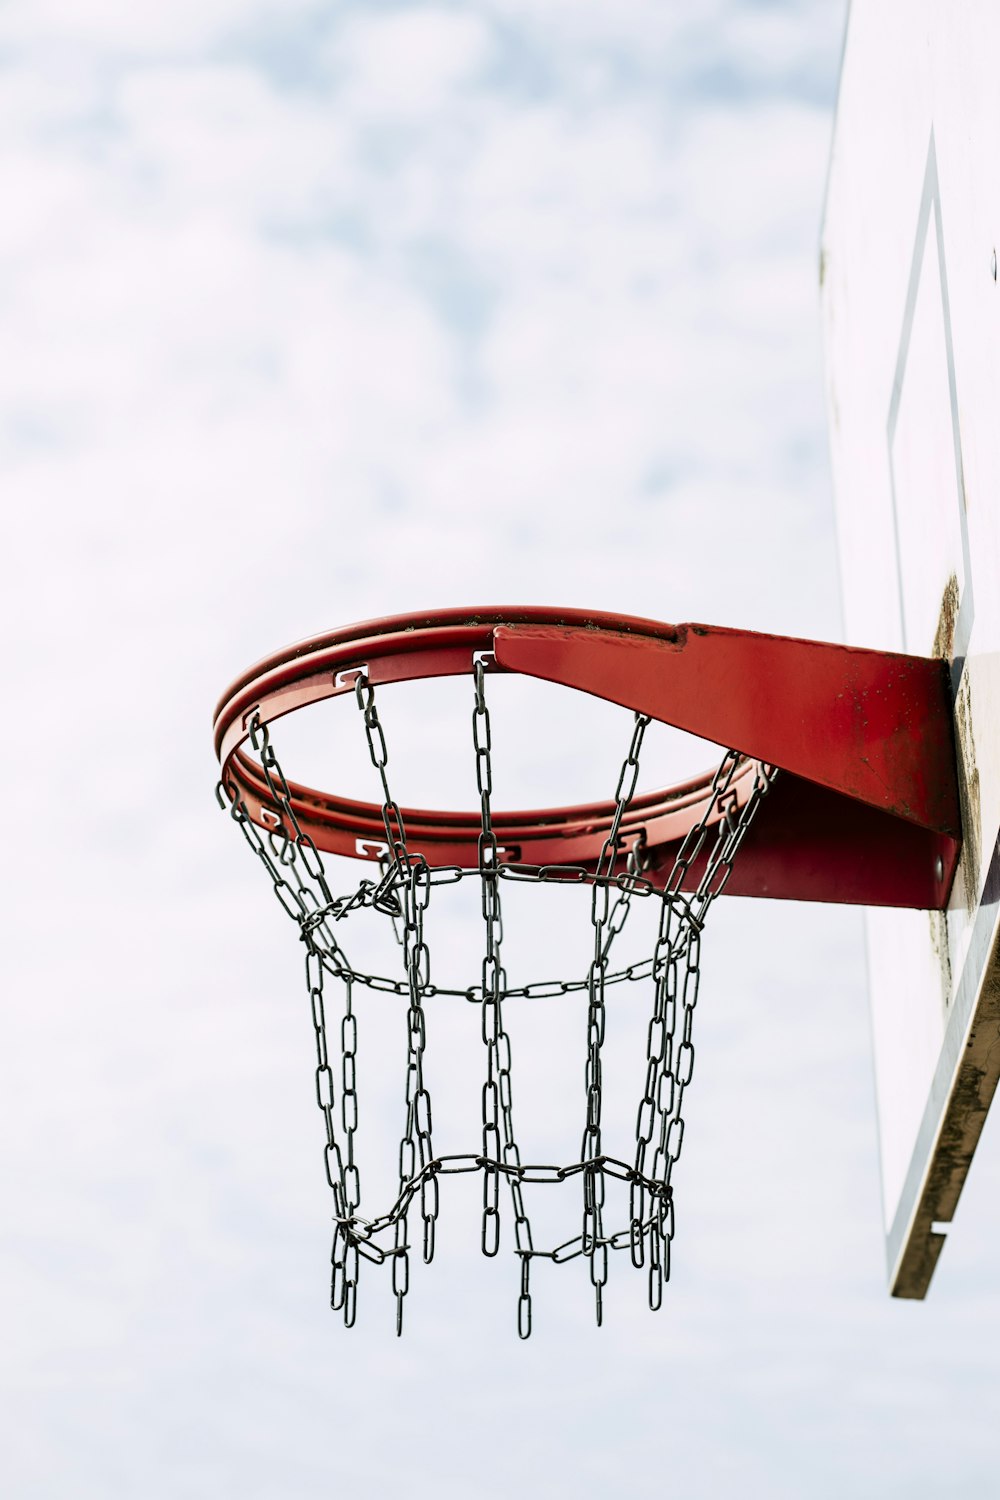 a close up of a basketball game